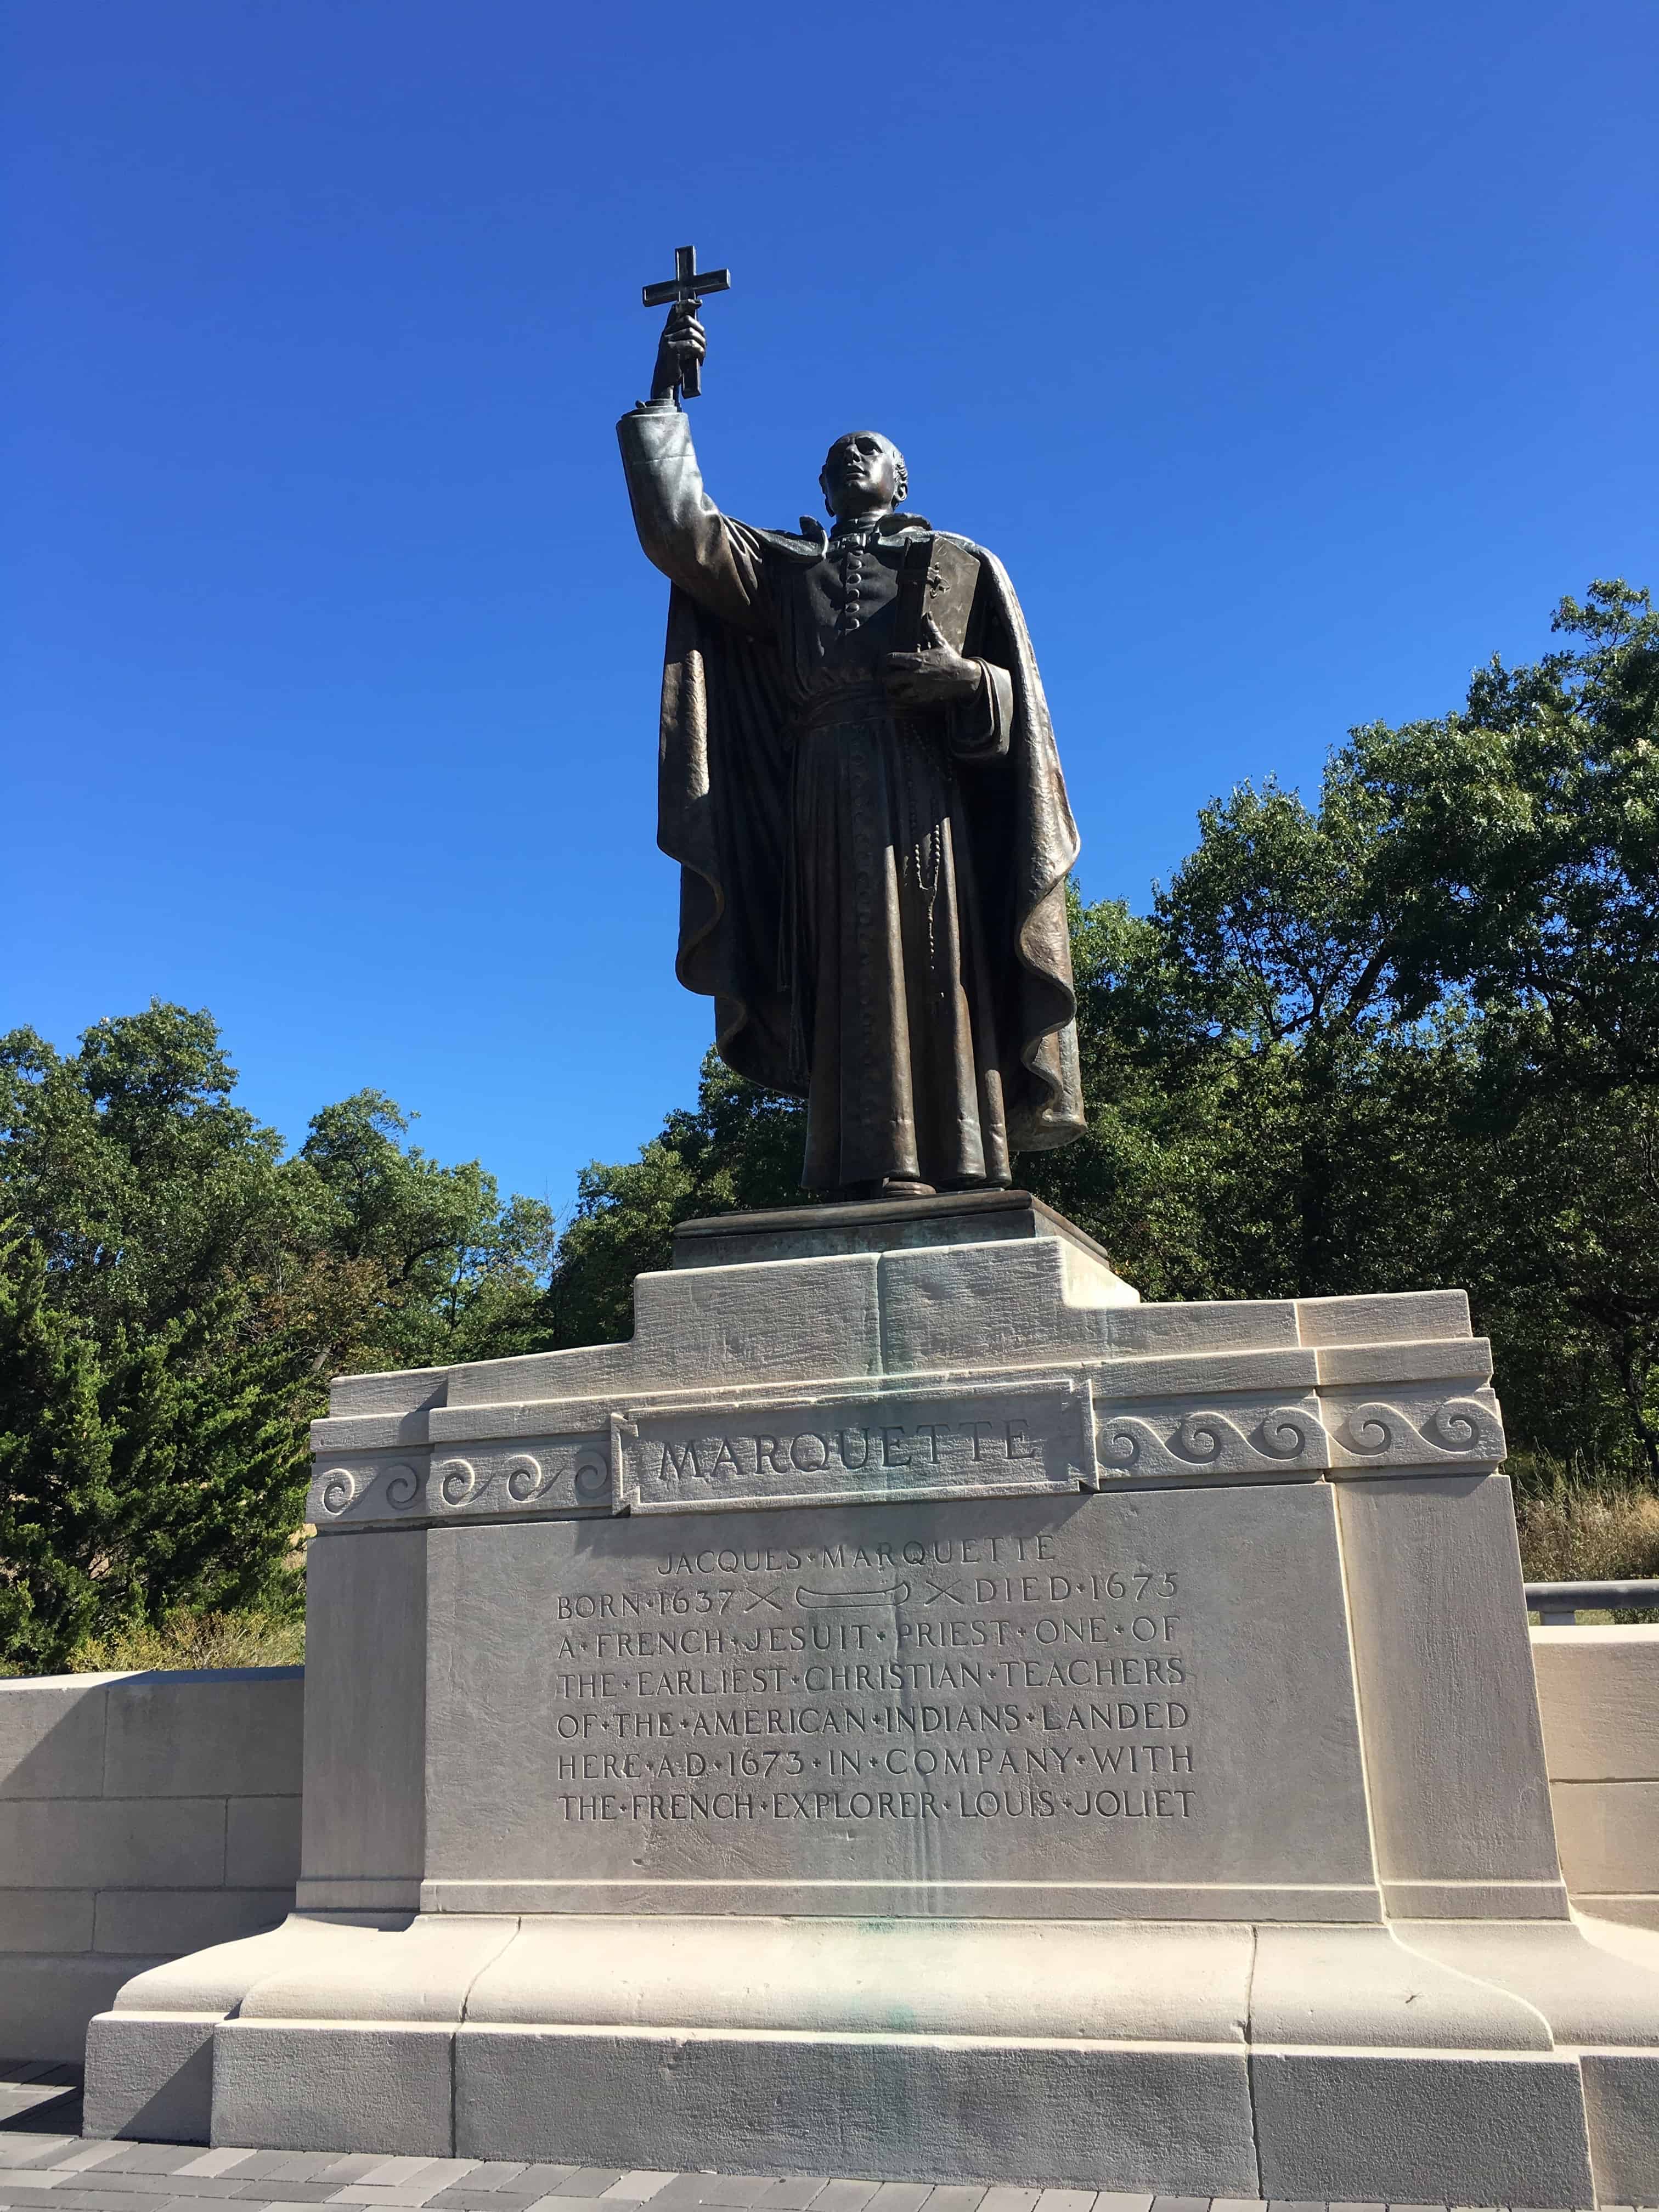 Fr. Jacques Marquette statue at Marquette Park, Miller Beach, Gary, Indiana